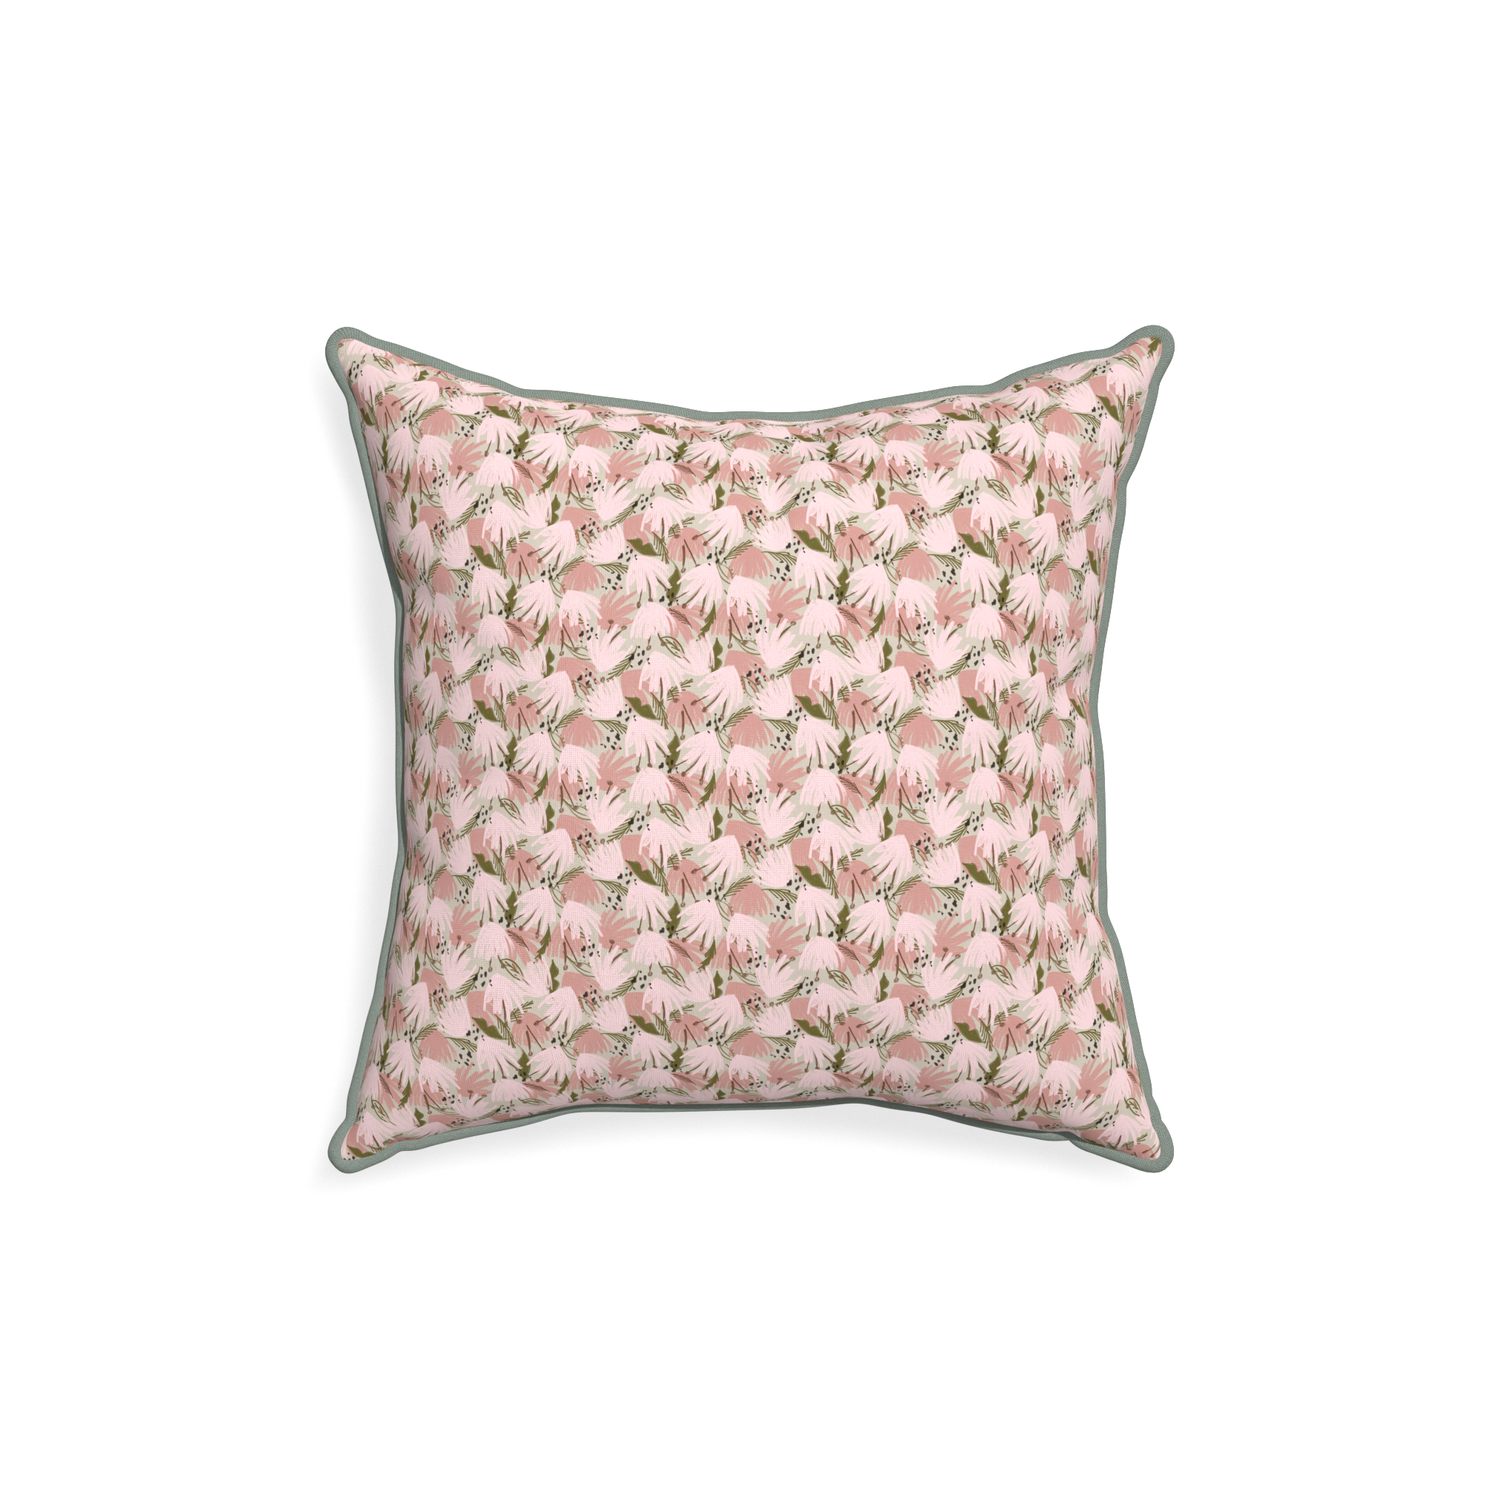 18-square eden pink custom pink floralpillow with sage piping on white background